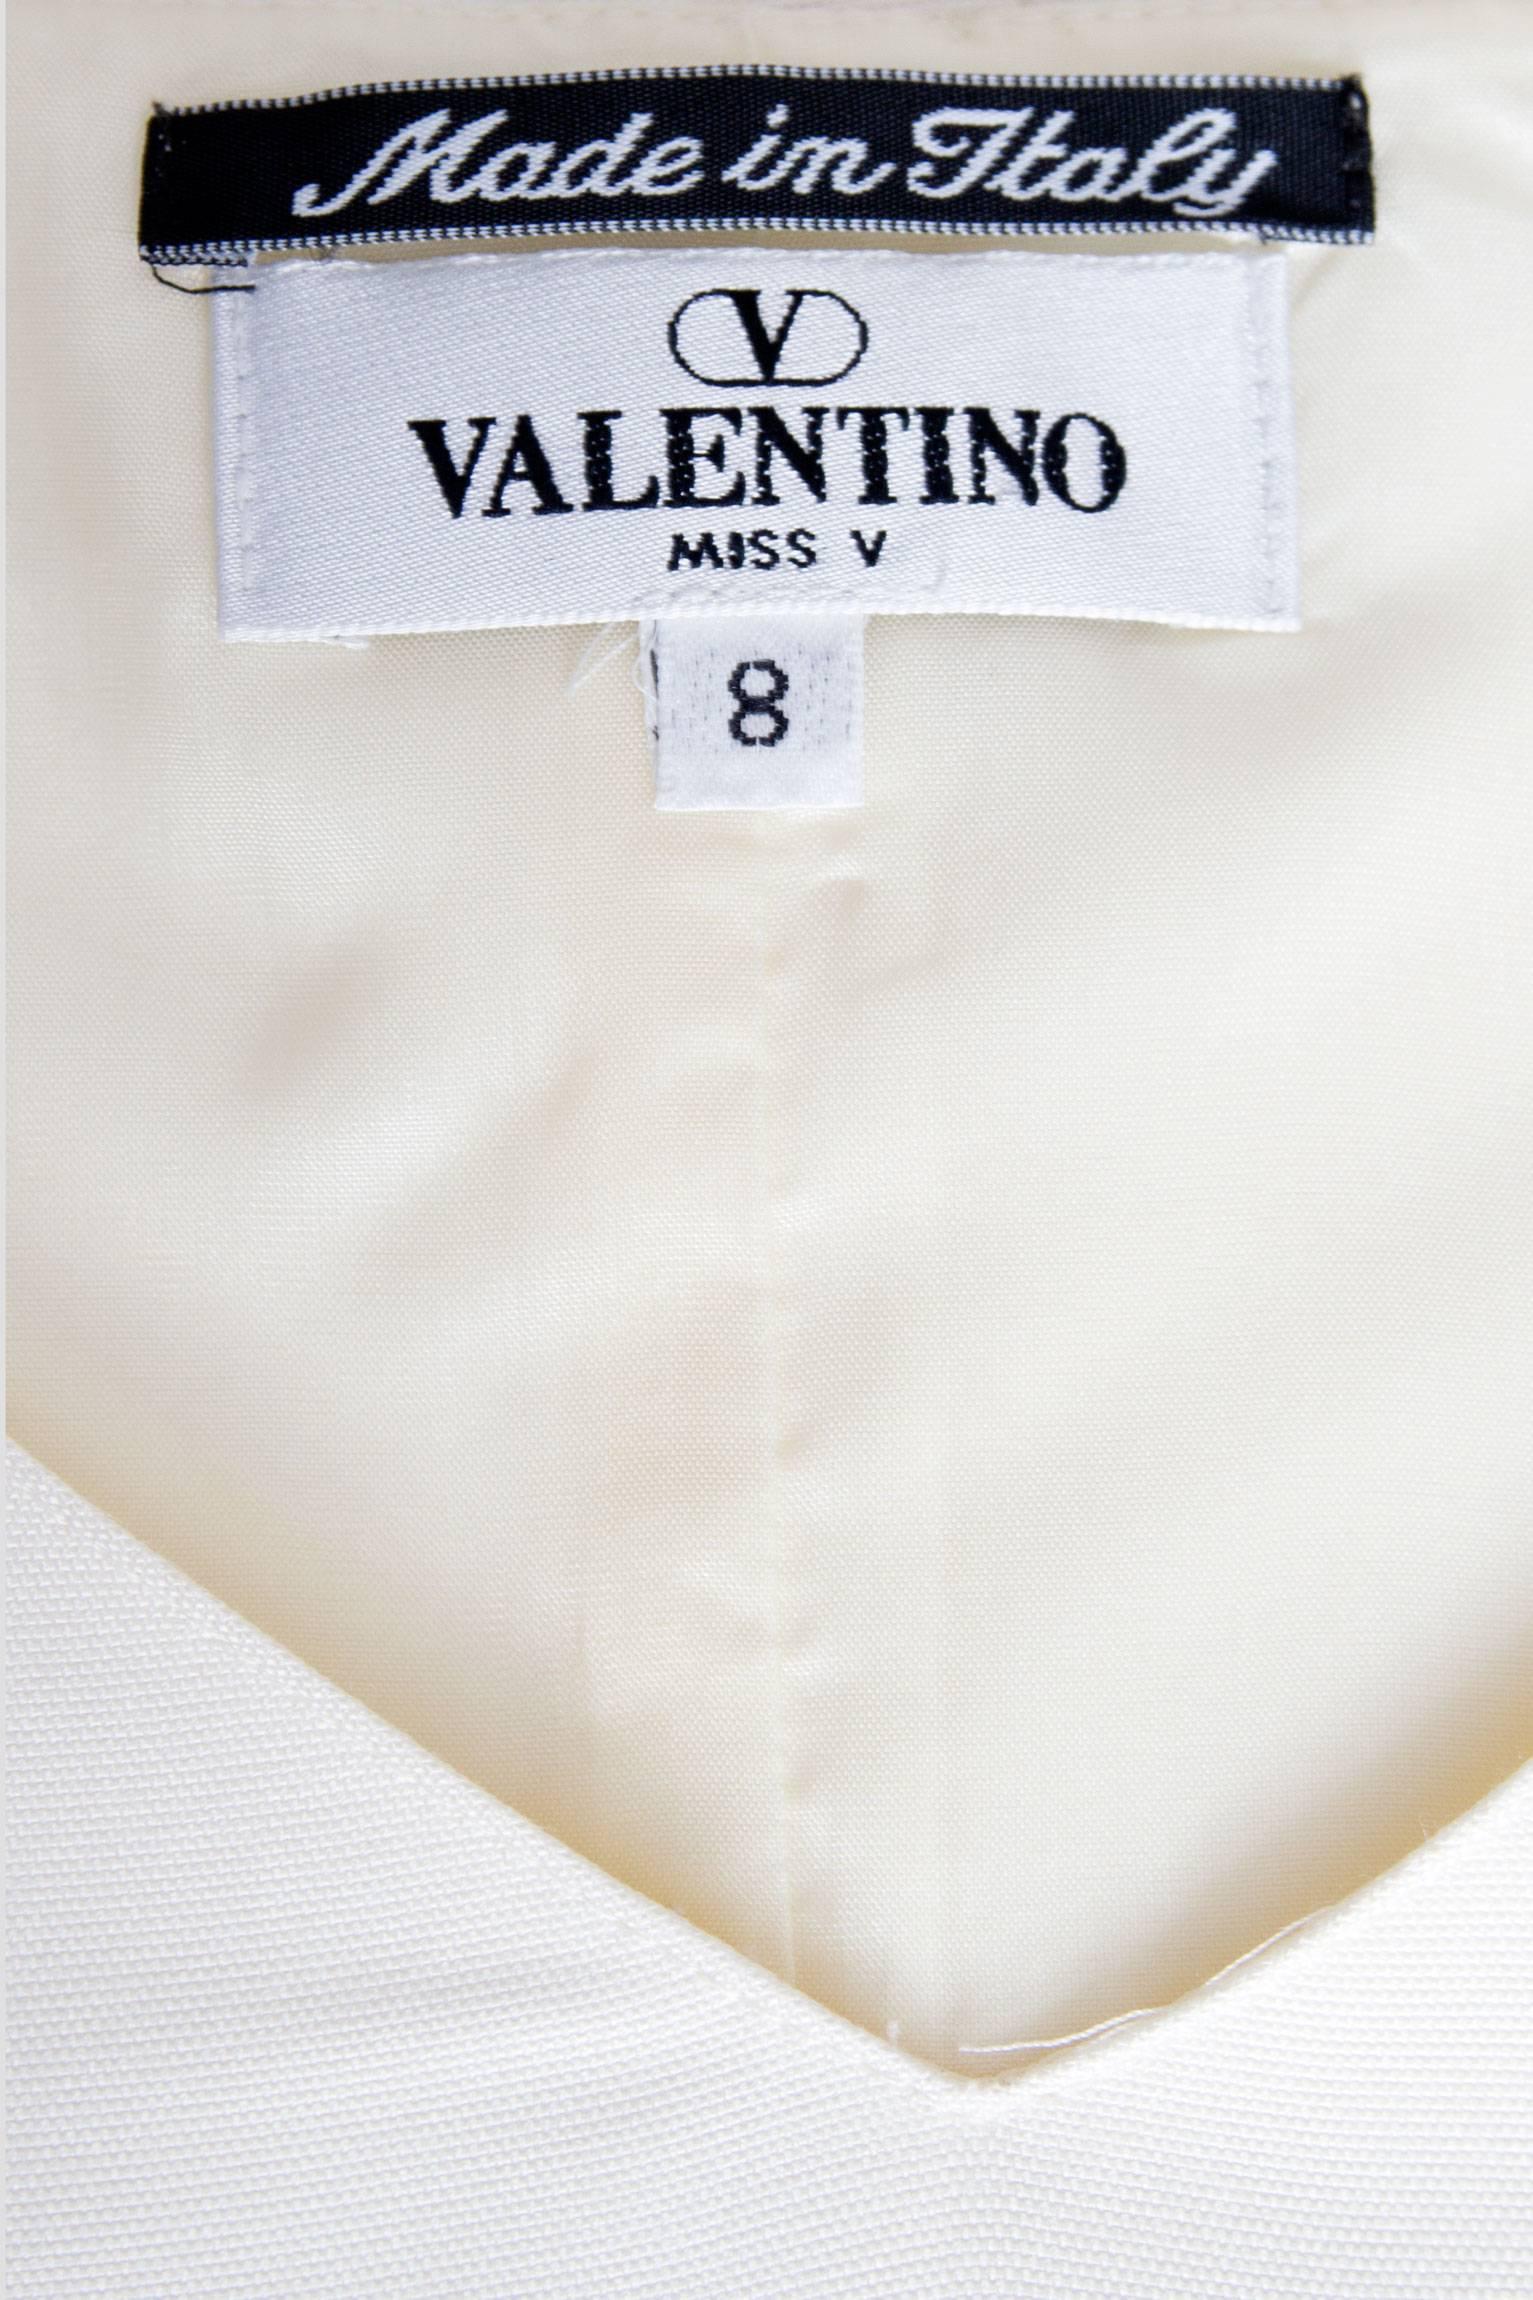 A lovely 1980s Valentino Miss V off-white silk dress with cap sleeves and a demure v neck in the front. A simple skirt cuts just below the knee and a drop waist with a beaded belt detail gives the dress an ekstra feminine touch. The cylinder shaped